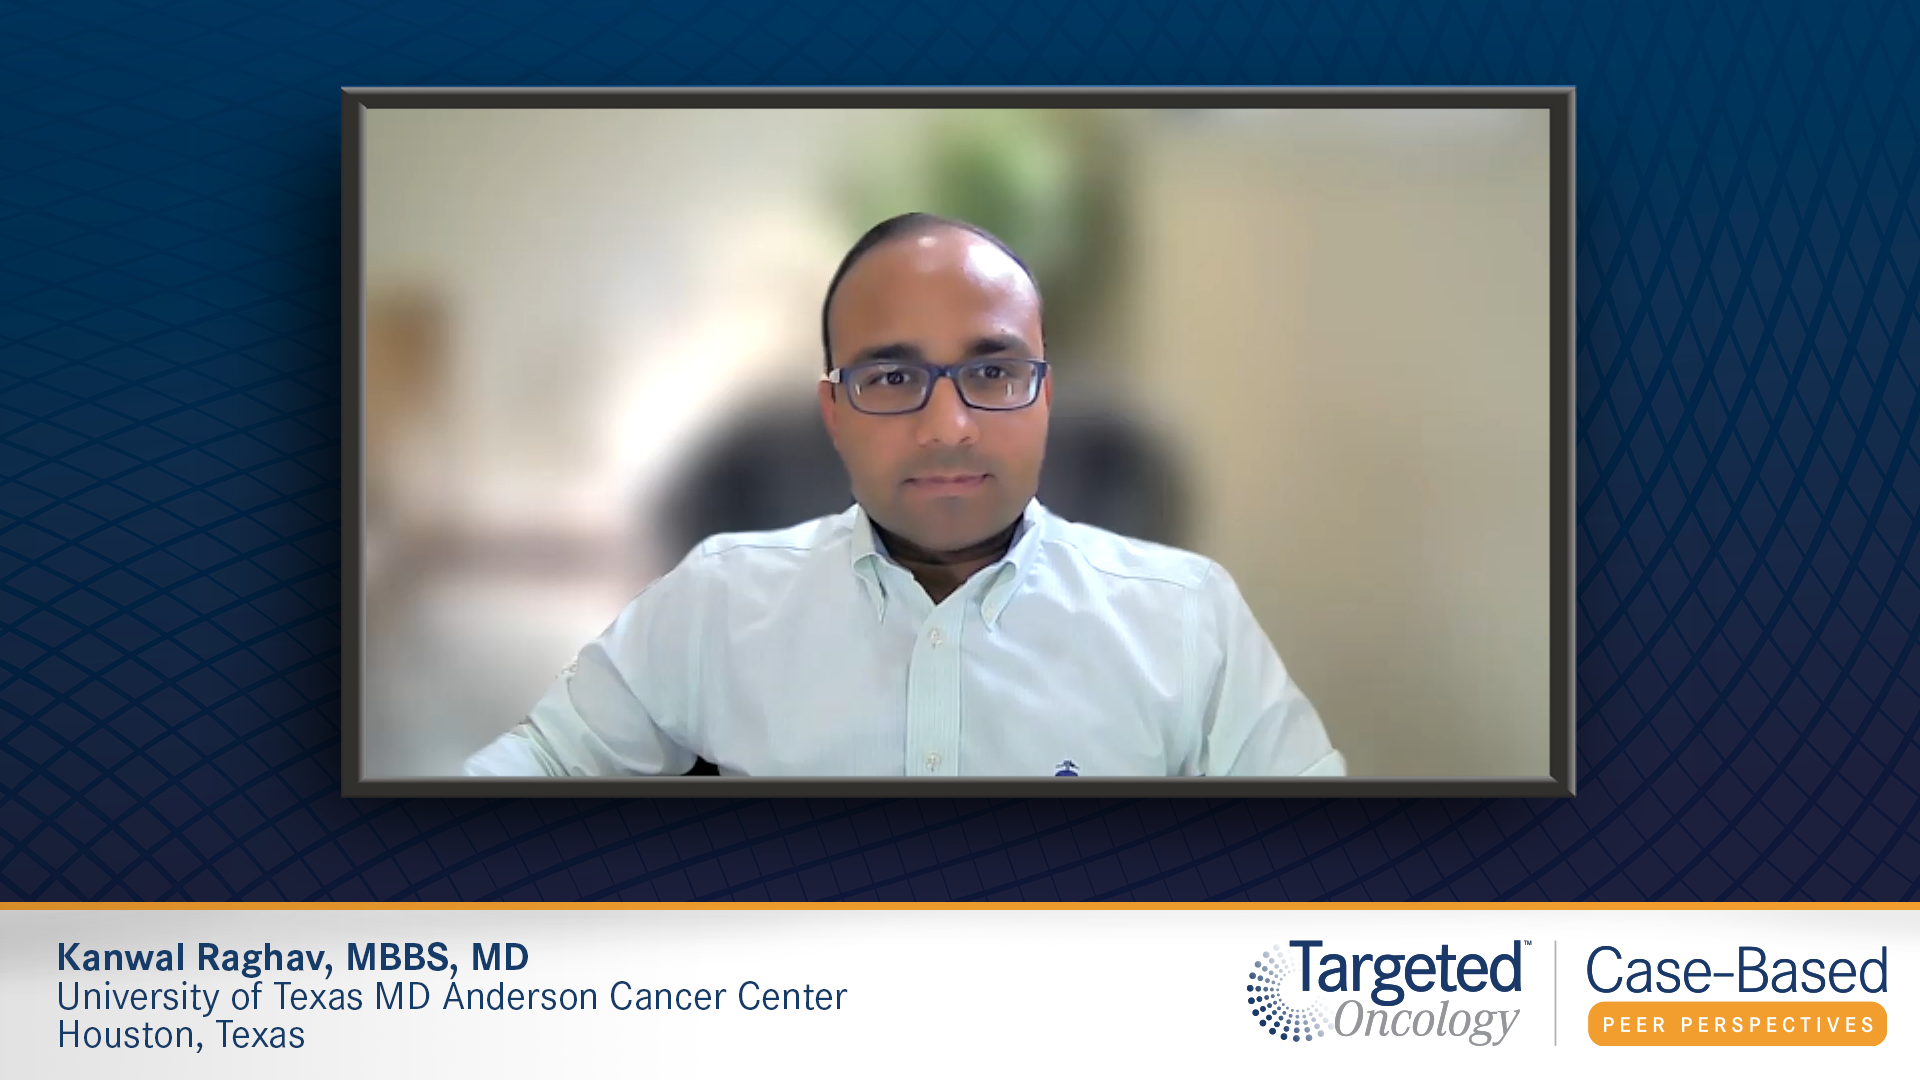 Treatment Sequencing in Metastatic Colorectal Cancer